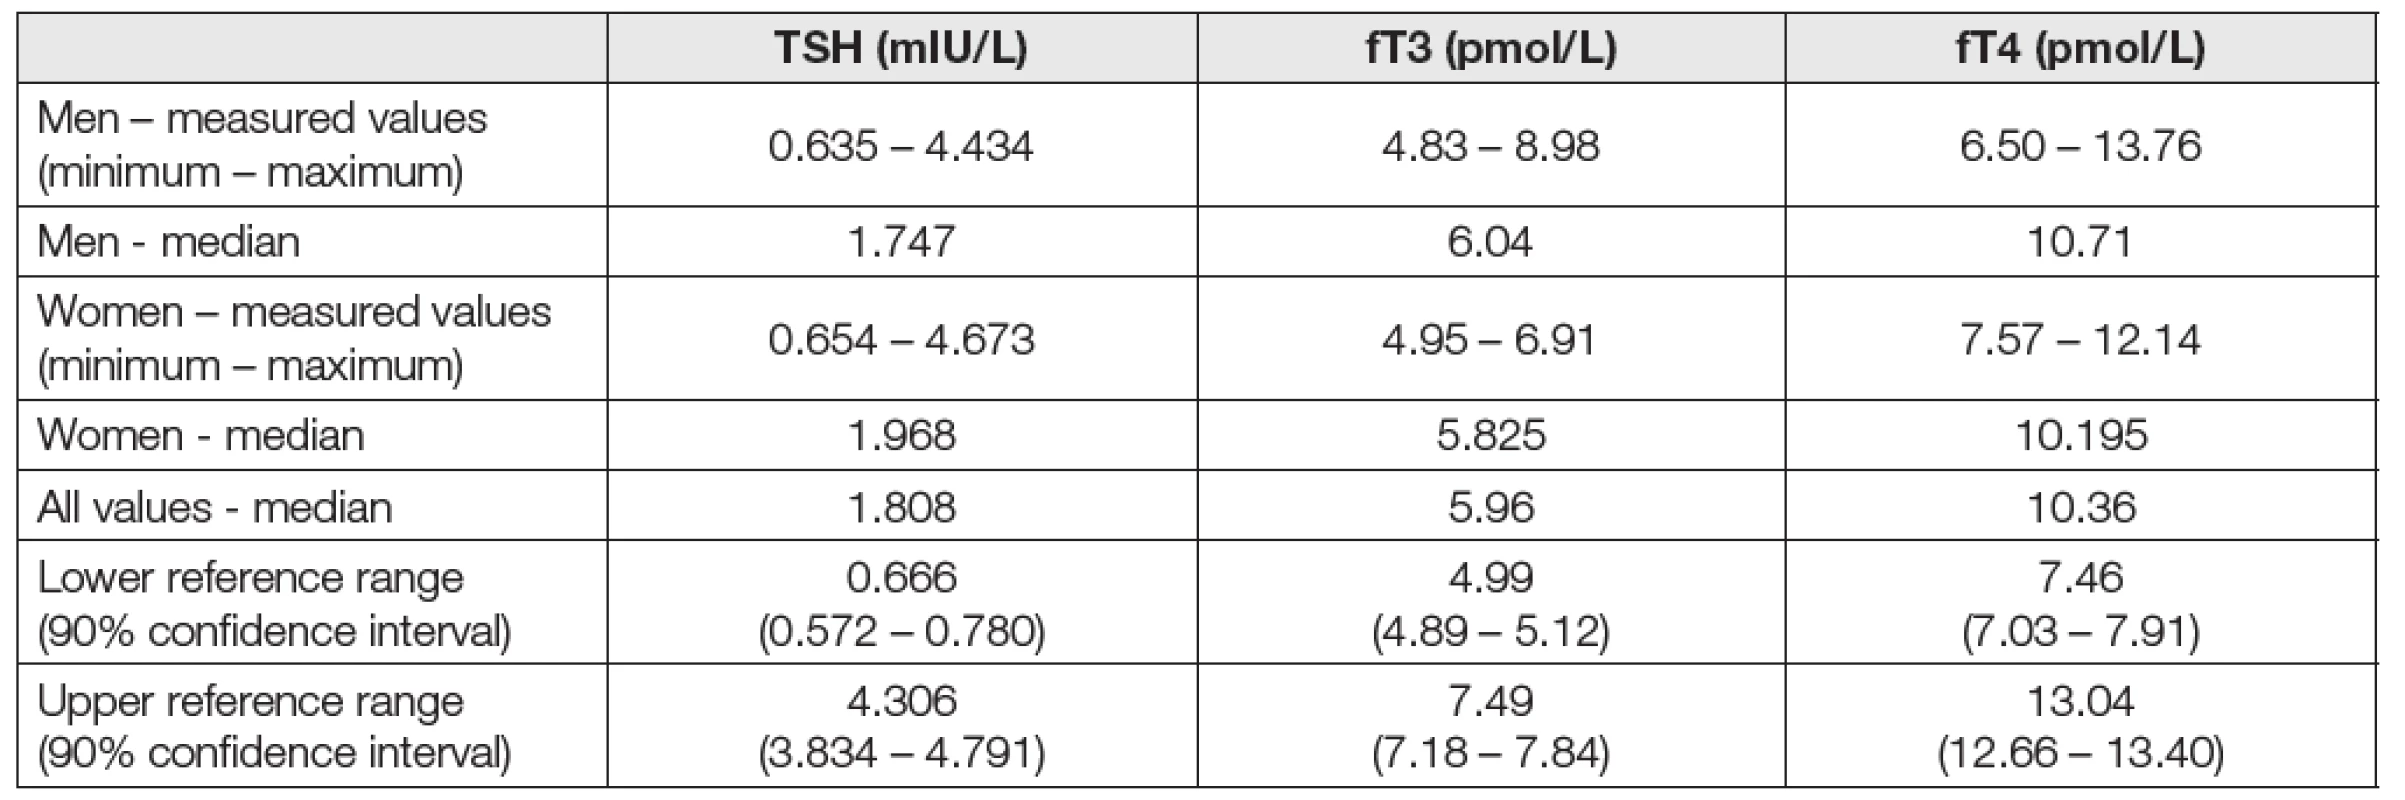 Results of the TSH, fT3 and fT4 values in 48 males and 51 females (after exclusion of samples with positive anti-
TPO)